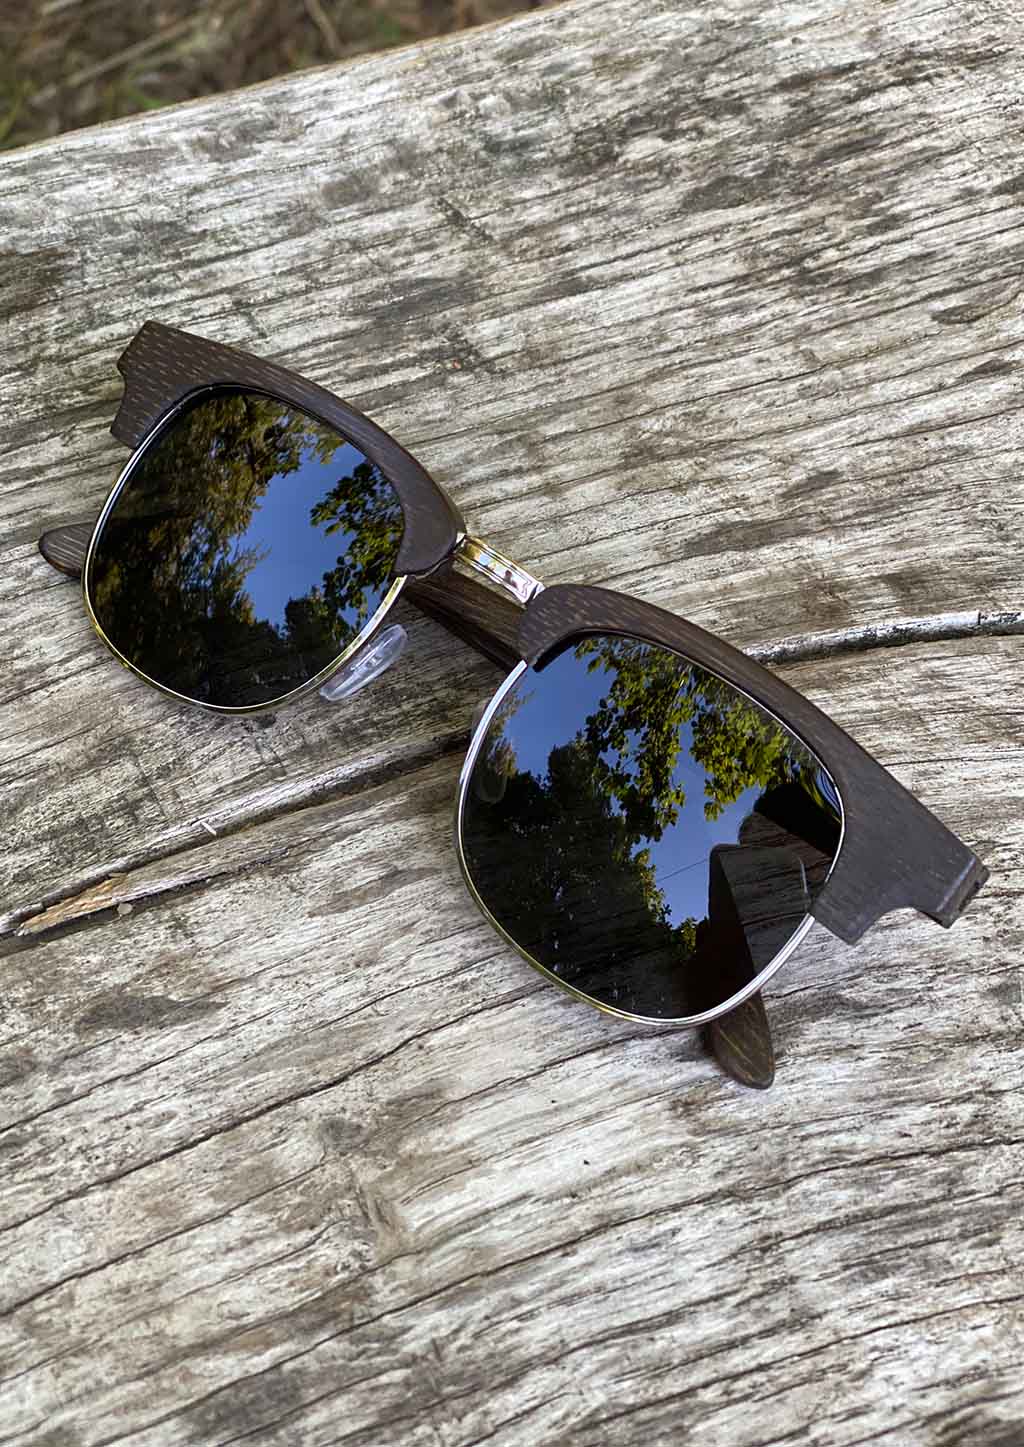 Eyewood Clubmasters is our cool take on classic model. This is Skyler with dark lenses. And also this model is made in all wood. Outside in the sun from the front.